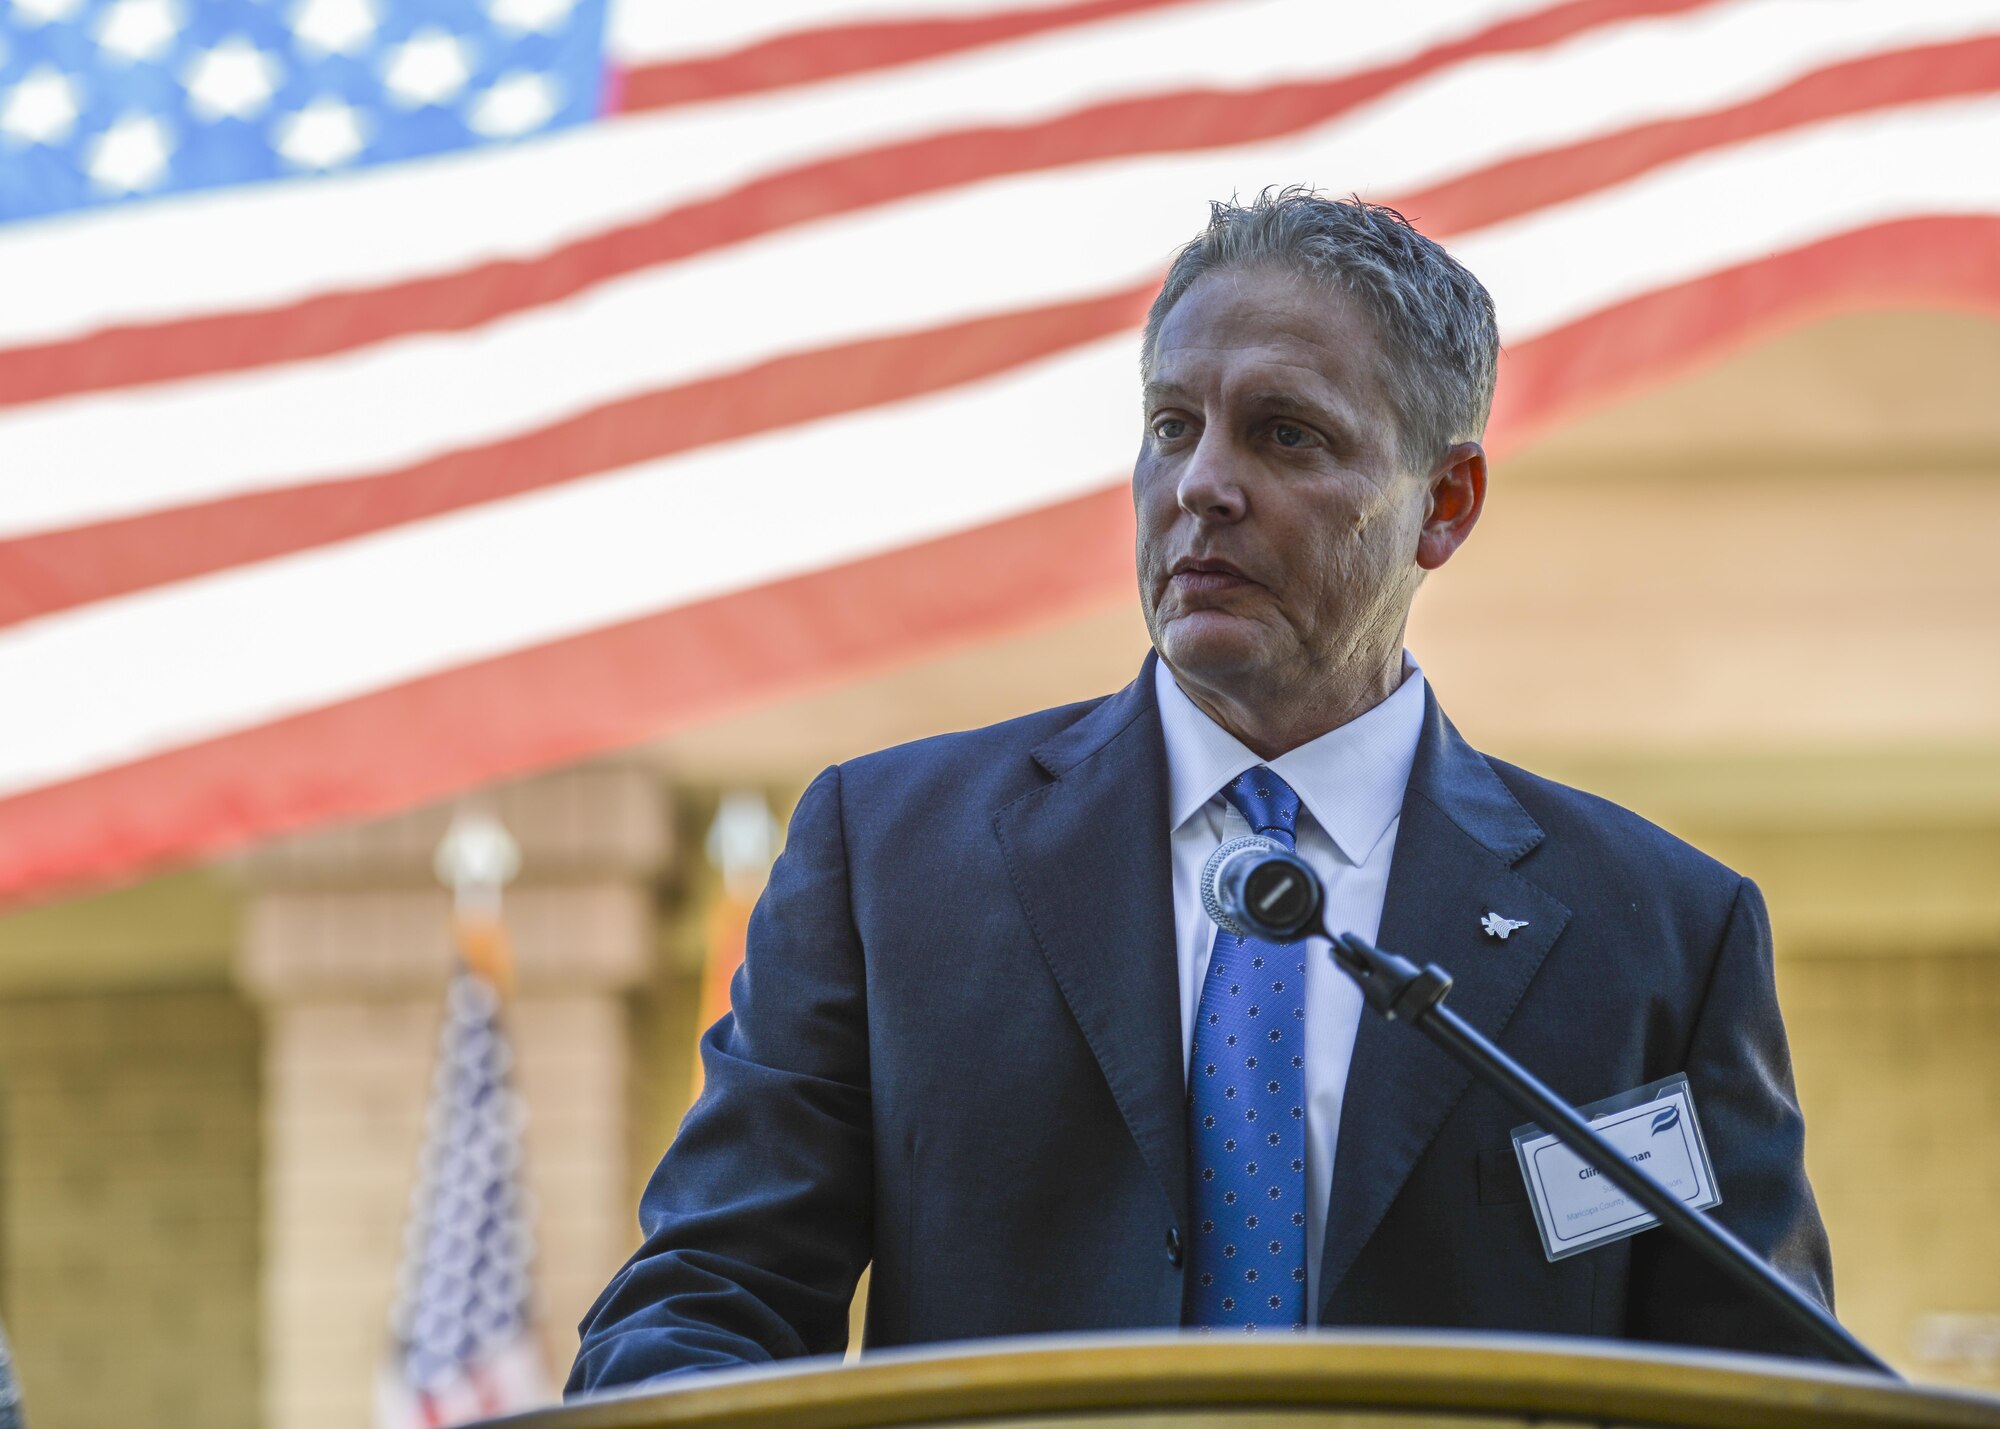 Clint Hickman, Maricopa County Board of Supervisor, speaks to a crowd of visitors at the grand opening of the Military and Veteran Success Center at Luke Air Force Base, Ariz., Nov. 9, 2017. The MVSC is a community supported, case-managed, holistic support center for transitioning service members, veterans, and their dependents. (U.S. Air Force photo/Airman 1st Class Caleb Worpel)